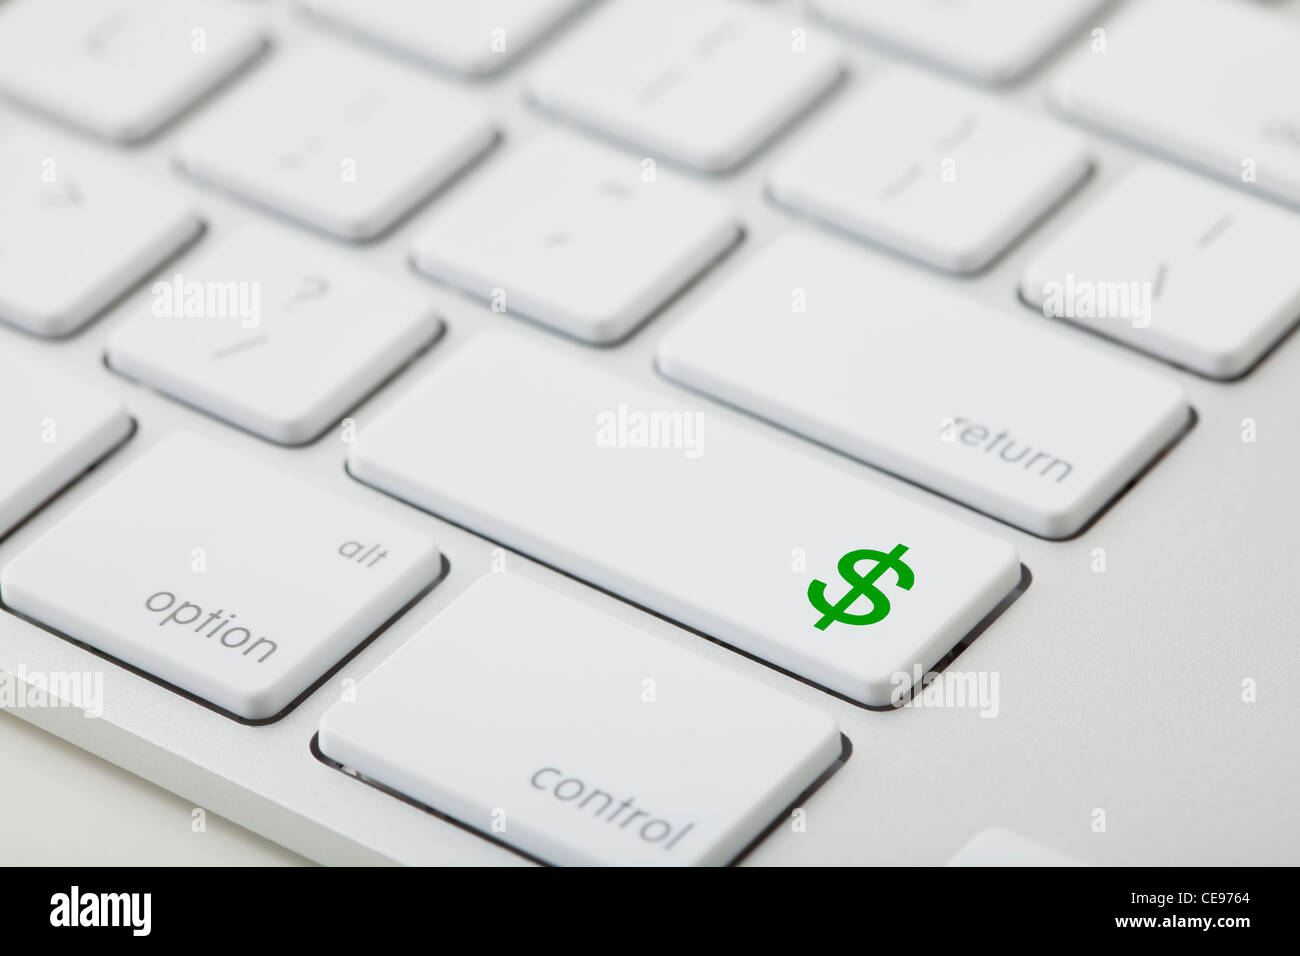 Computer keyboard with dollar sign on key Stock Photo